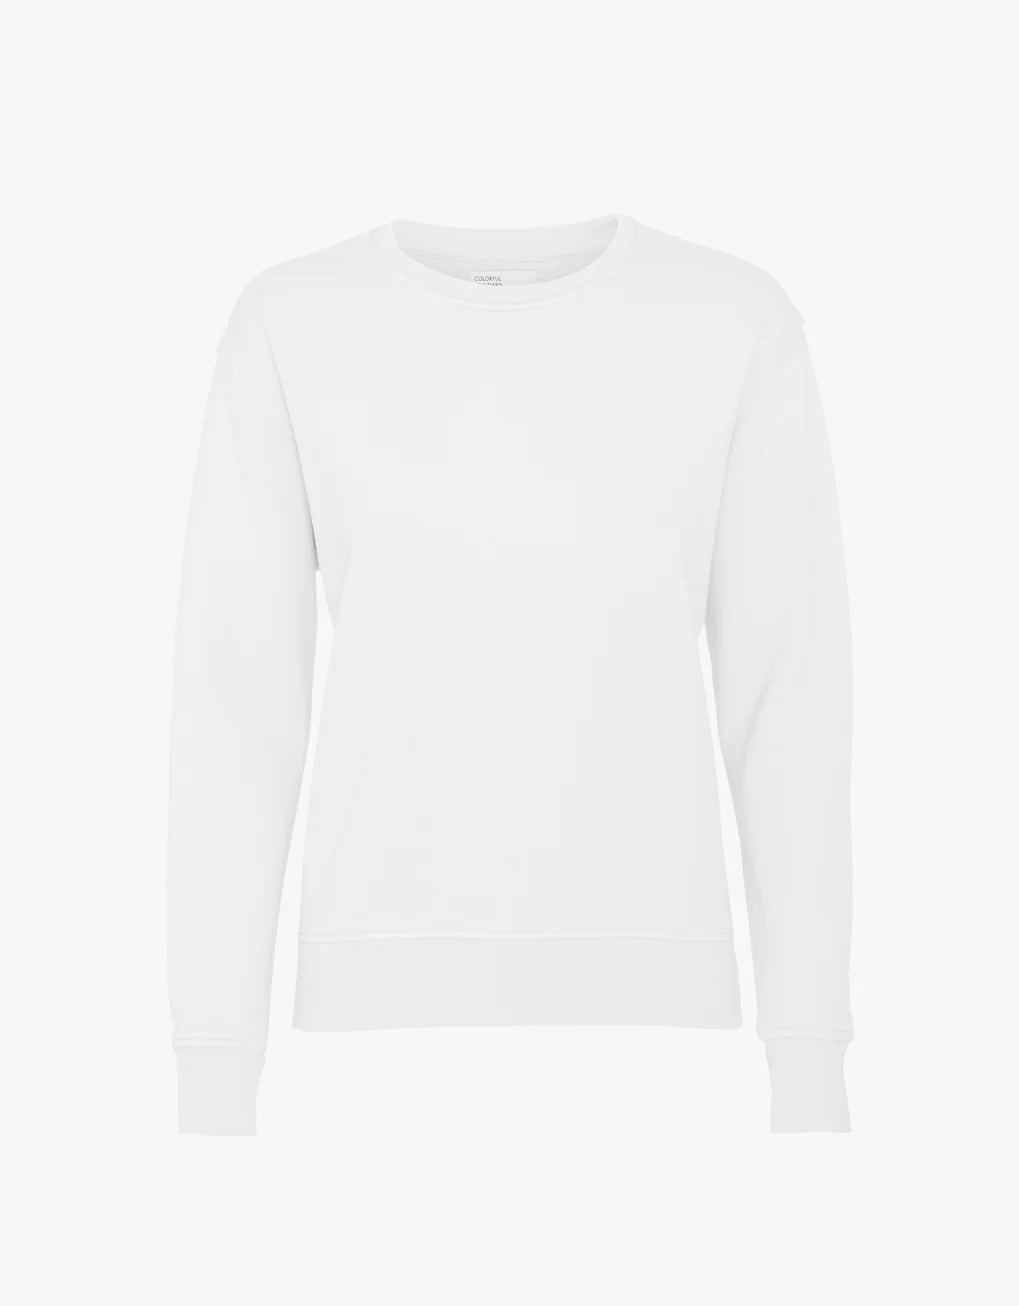 A Colorful Standard Classic Organic Crew sweatshirt on a white background.